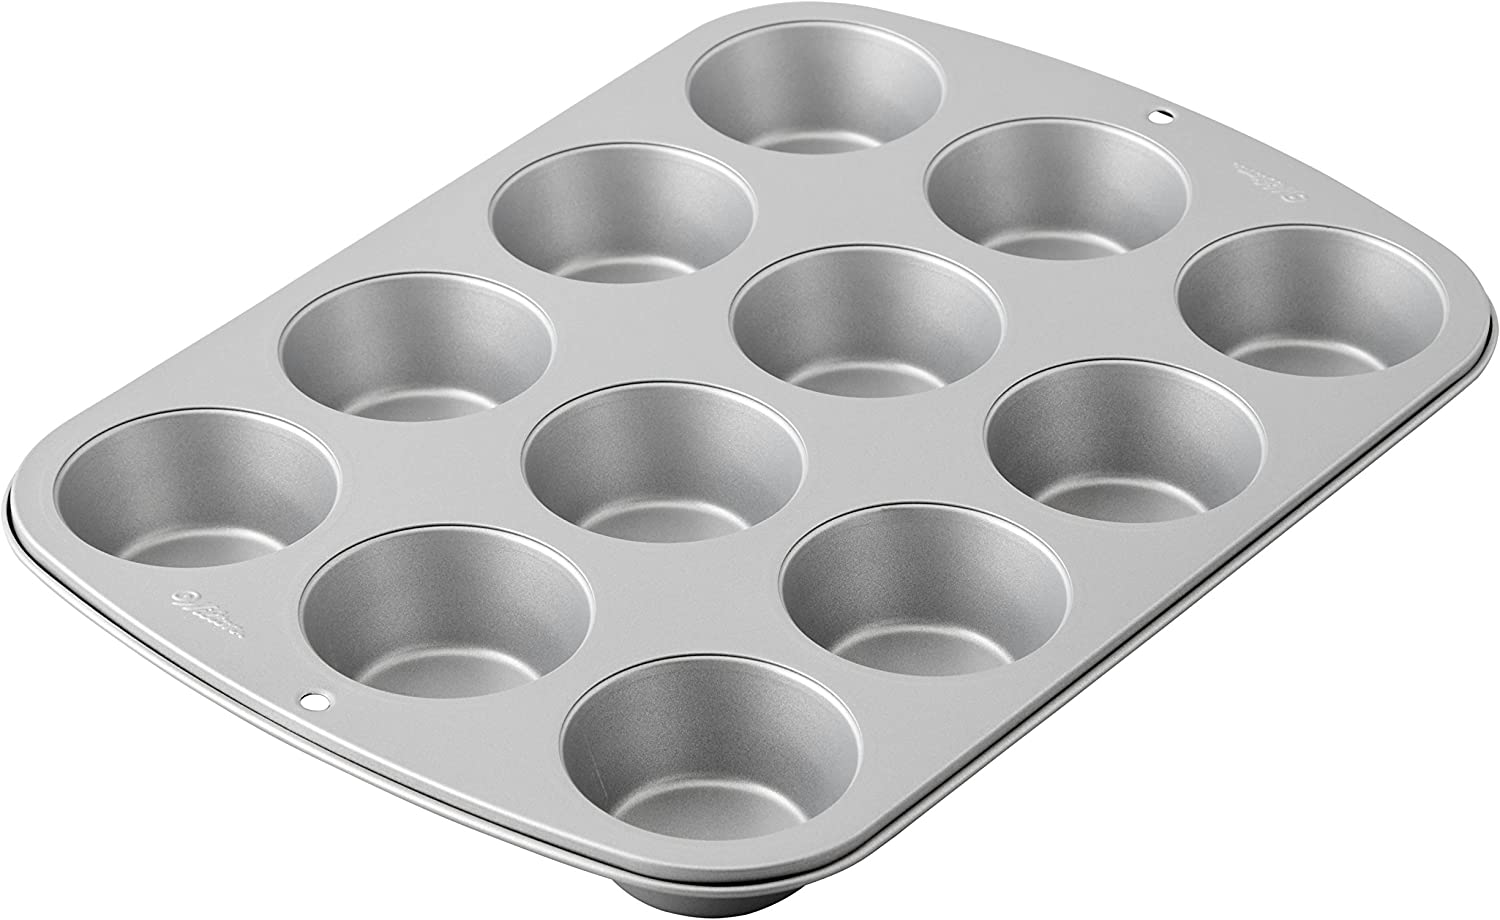 OXO Good Grips Non-Stick 12 Cup Aluminized Steel Muffin Baking Pan